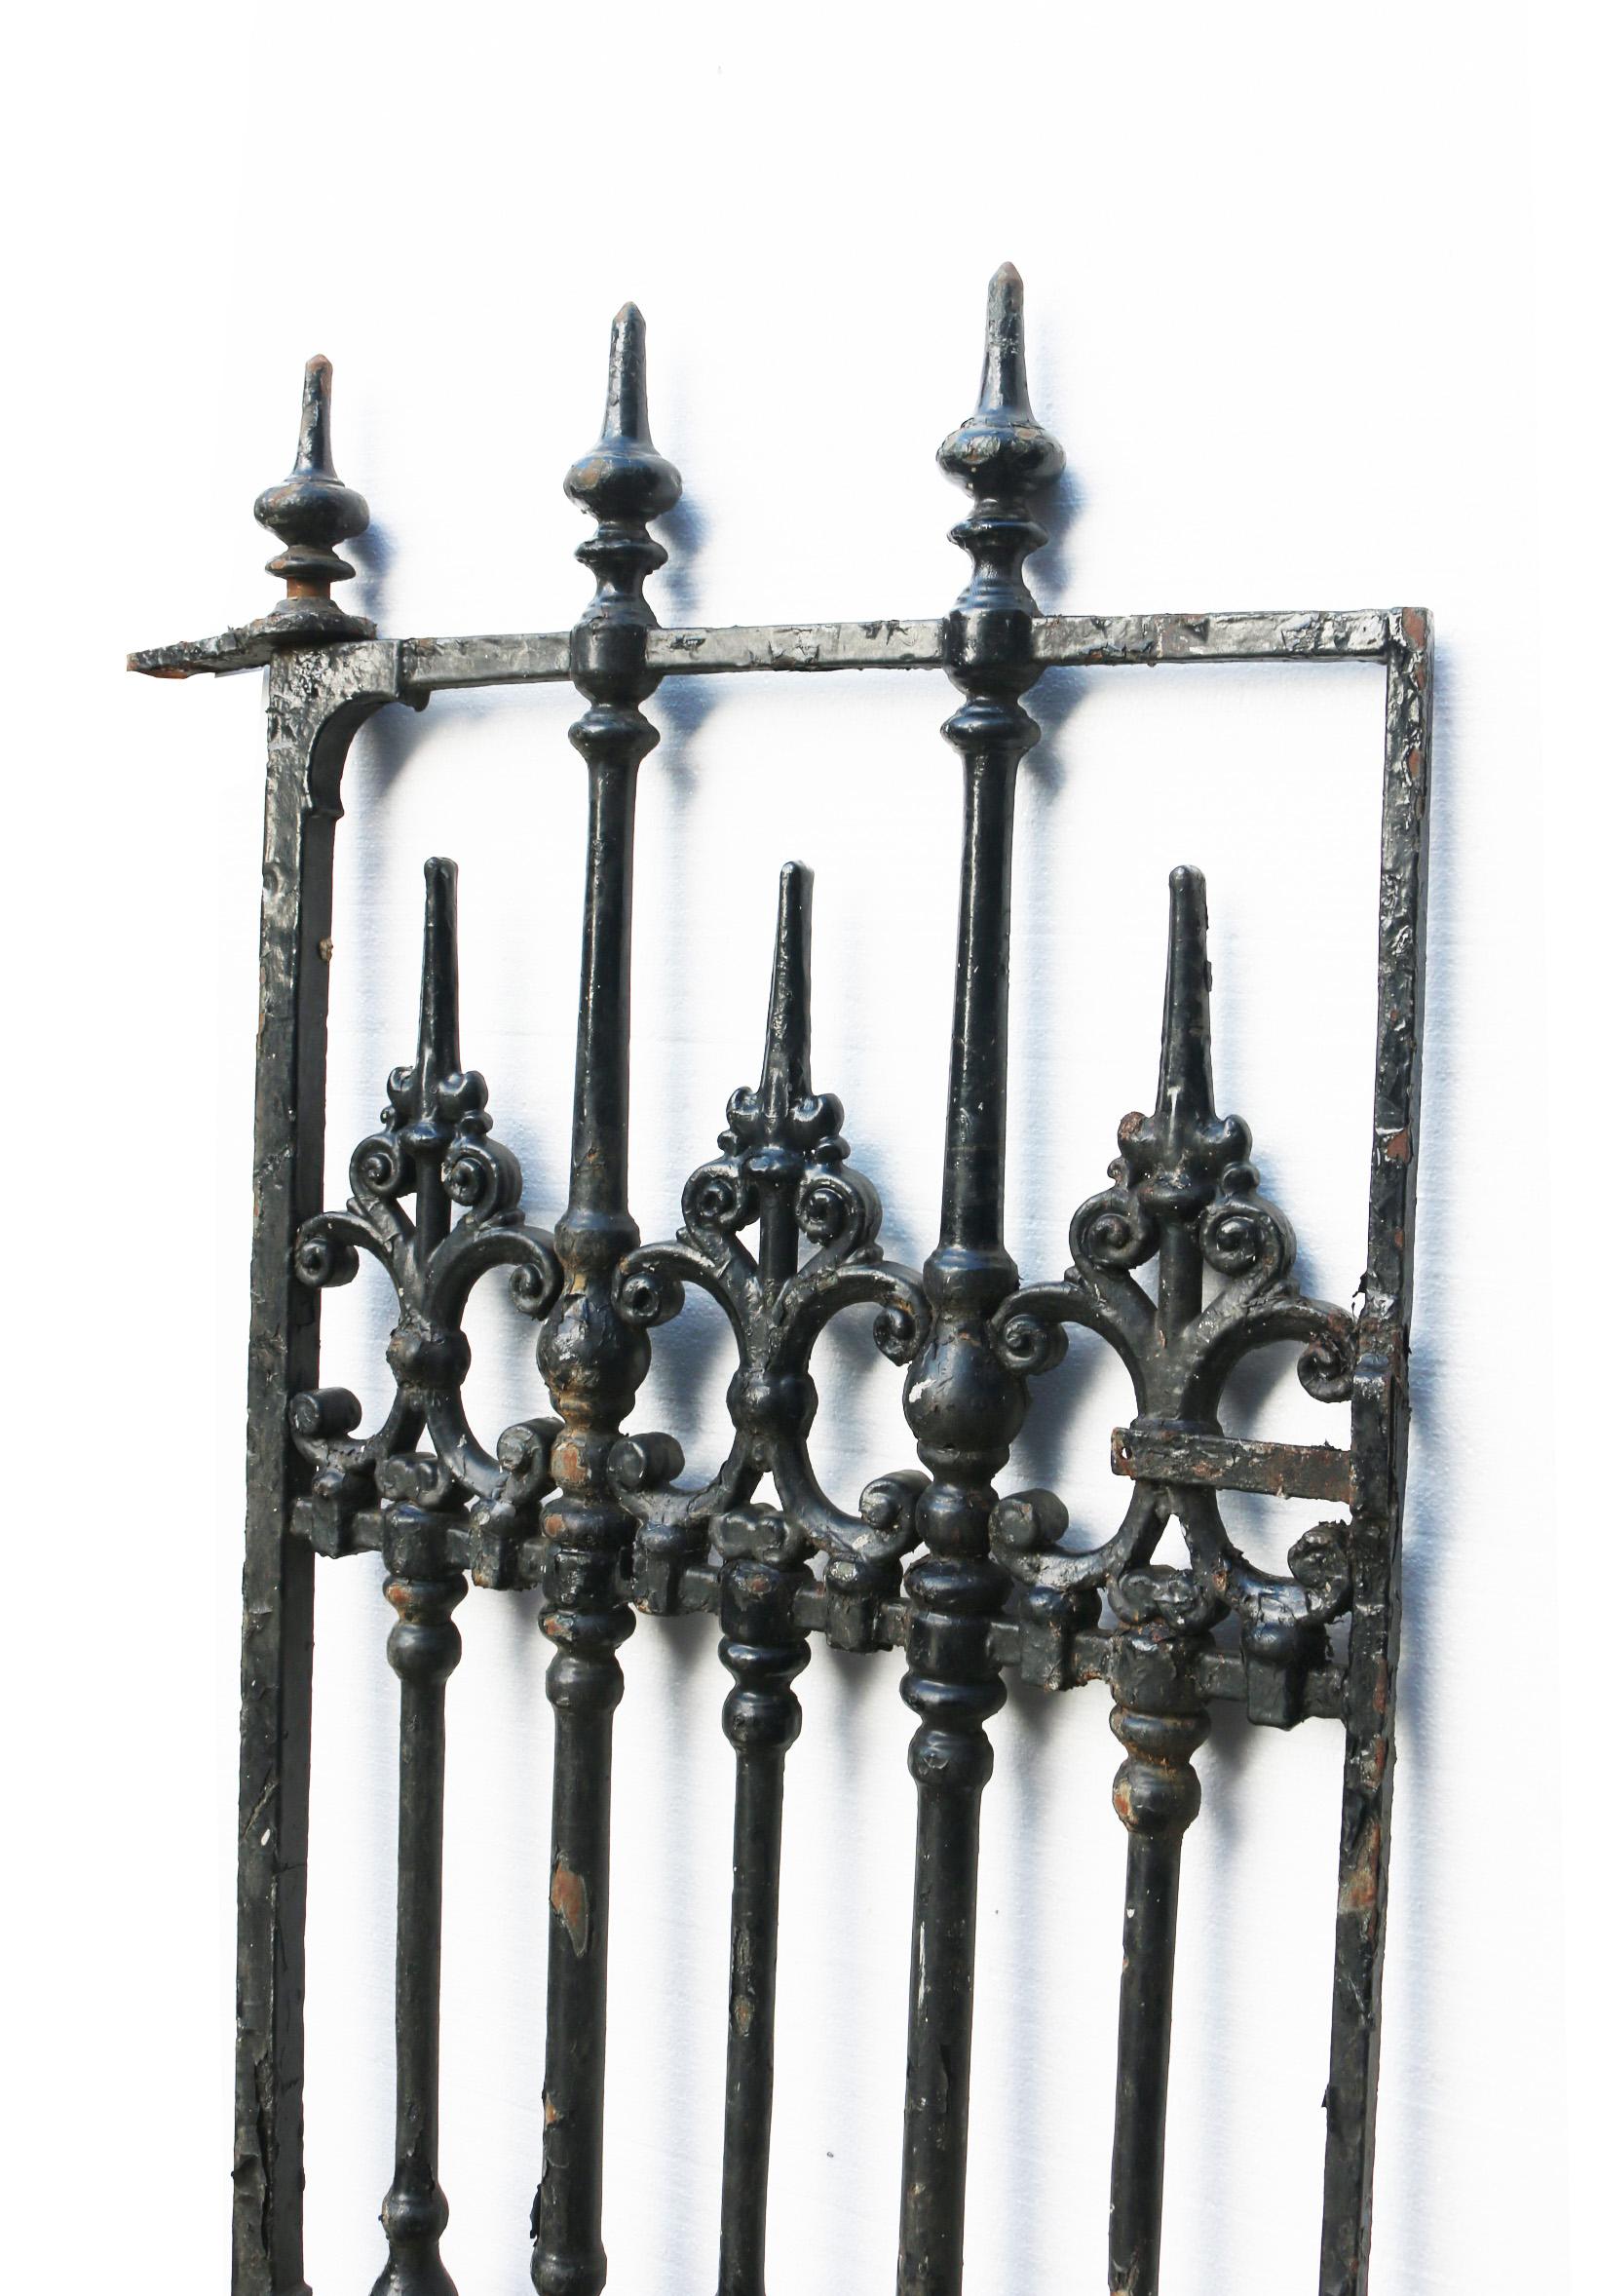 This beautifully made cast iron pedestrian gate is in excellent condition for its age with only some surface rust, but has no obvious cracks or damage. Finished in old flaky paint.

Measures: Height 140 cm 

Width 75.5 cm (gate only)

Depth